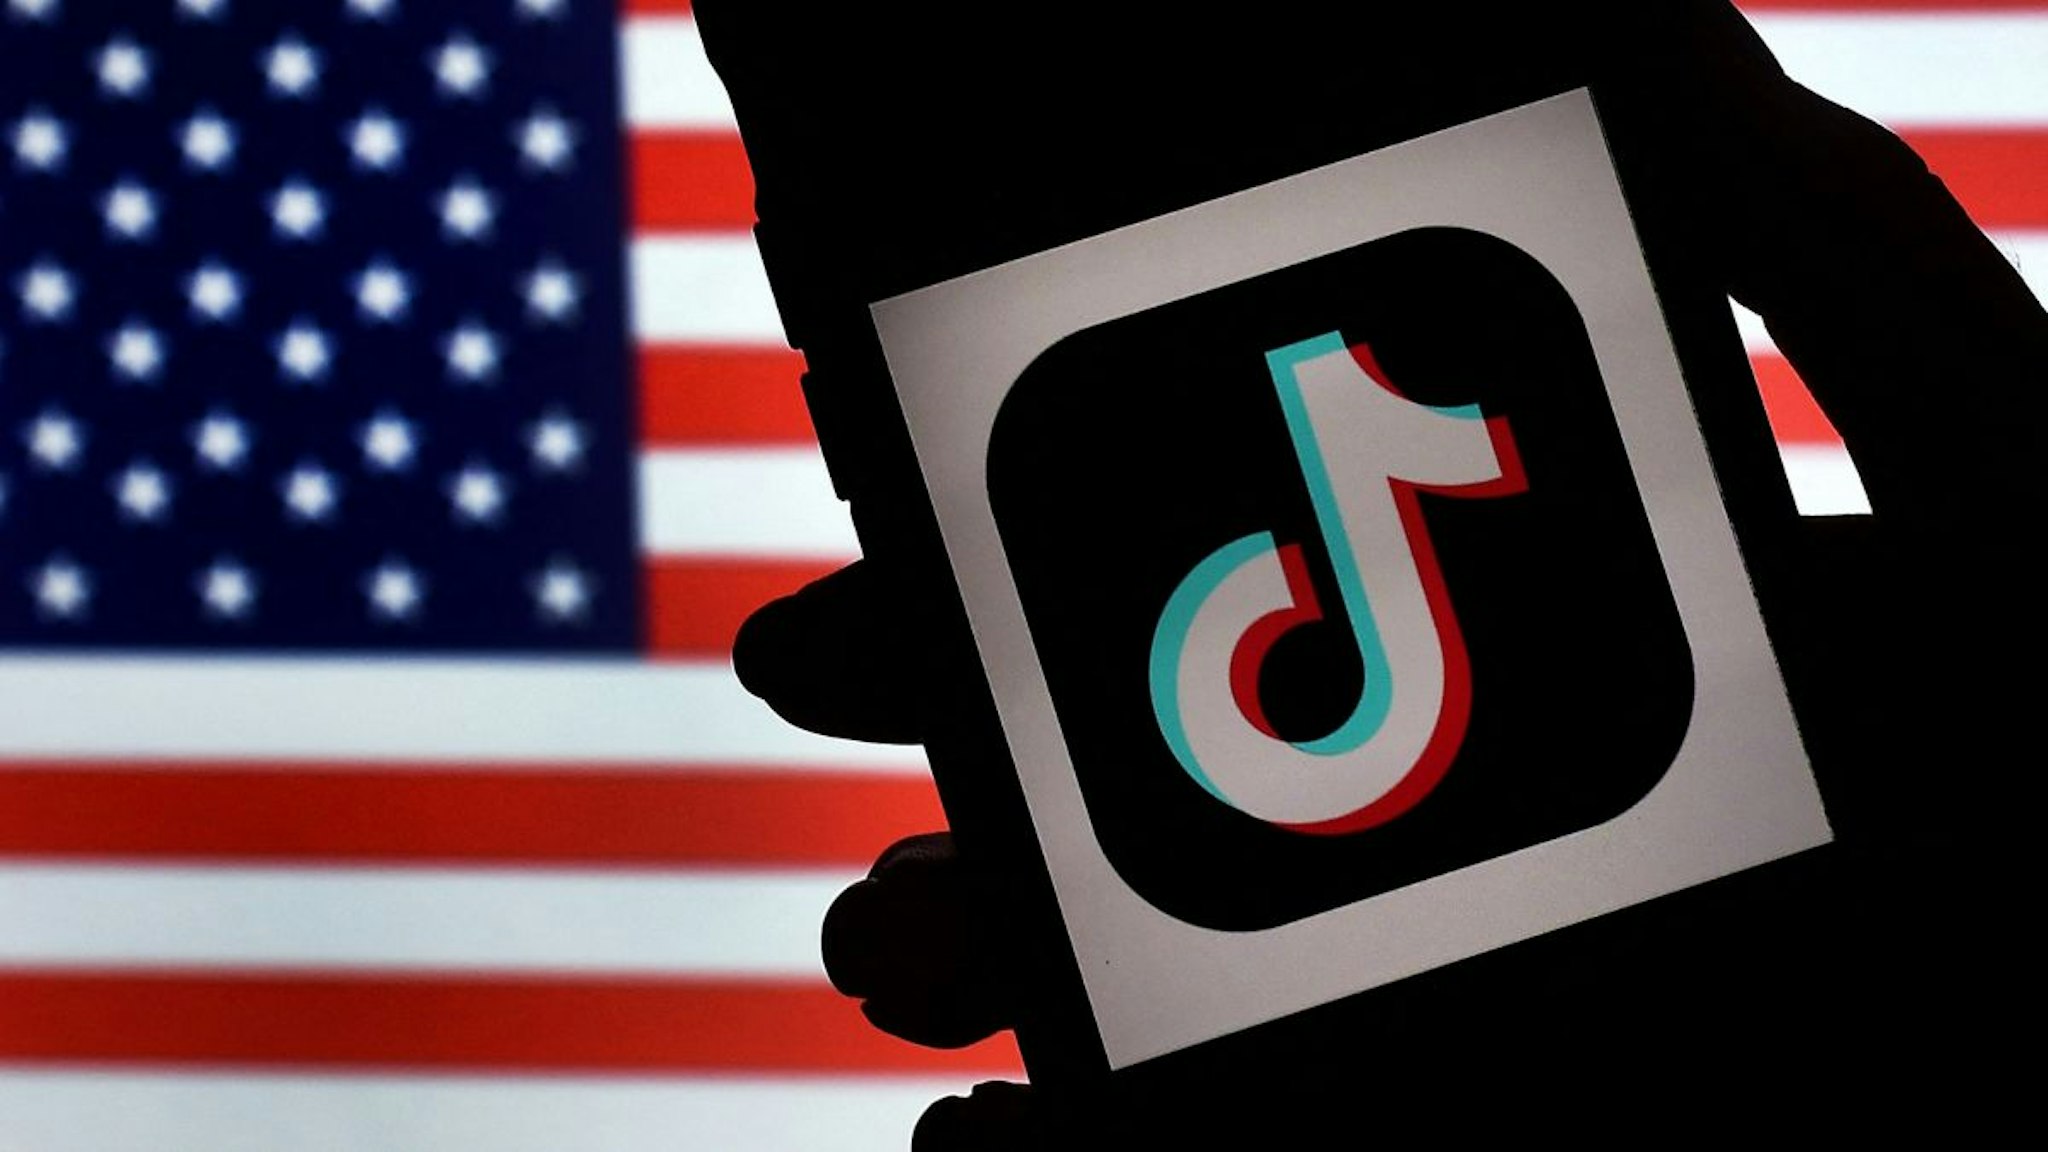 In this photo illustration, the social media application logo, TikTok is displayed on the screen of an iPhone on an American flag background on August 3, 2020 in Arlington, Virginia.